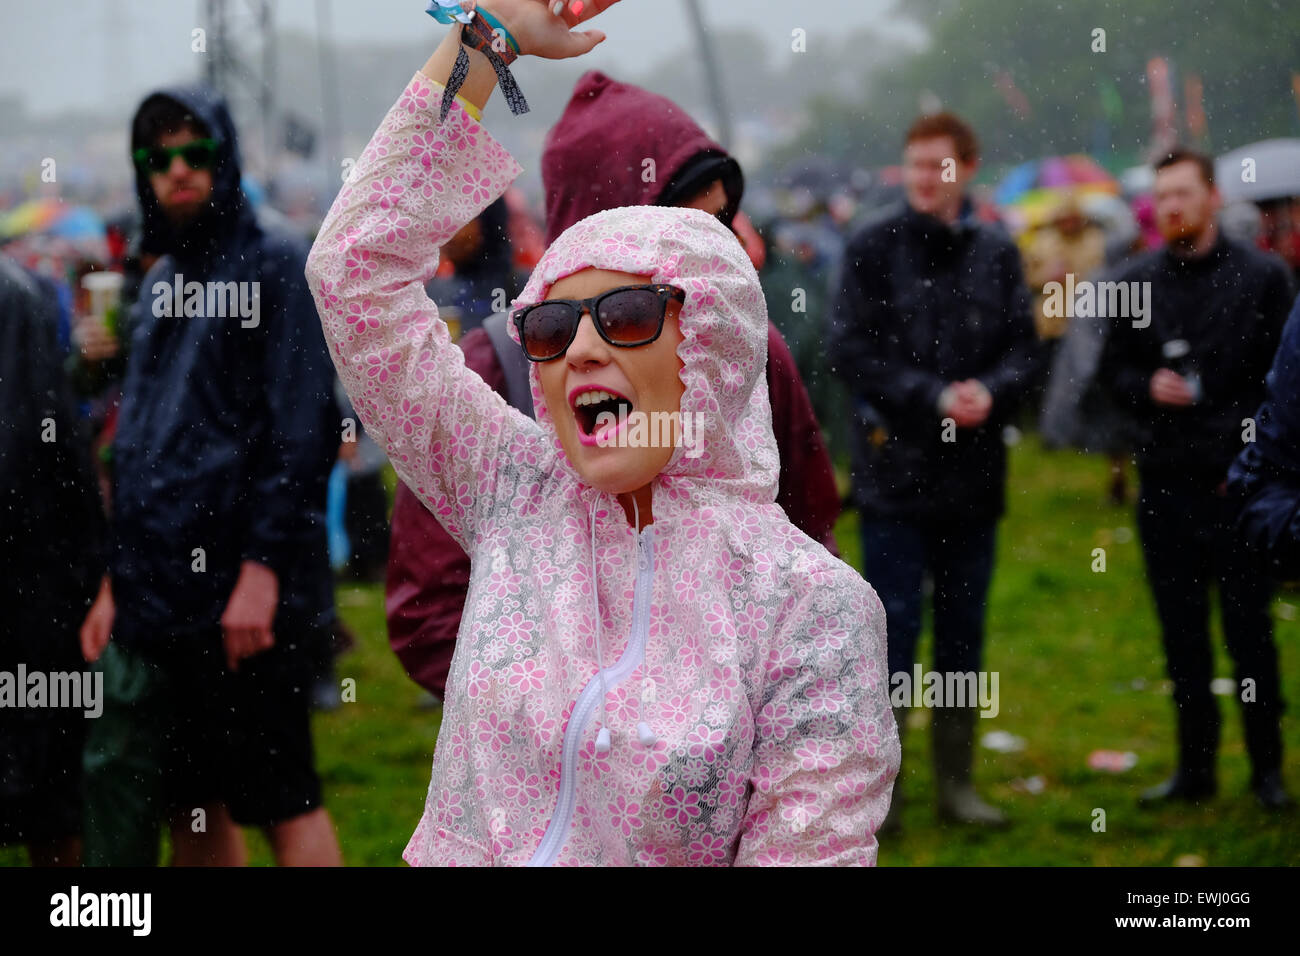 Glastonbury Festival, Somerset, UK. 26 June 2015. Several heavy downpours soaked the crowd during the afternoon. Despite the soaking spirits remained high and the Glastonbury mood prevailed. Credit:  Tom Corban/Alamy Live News Stock Photo